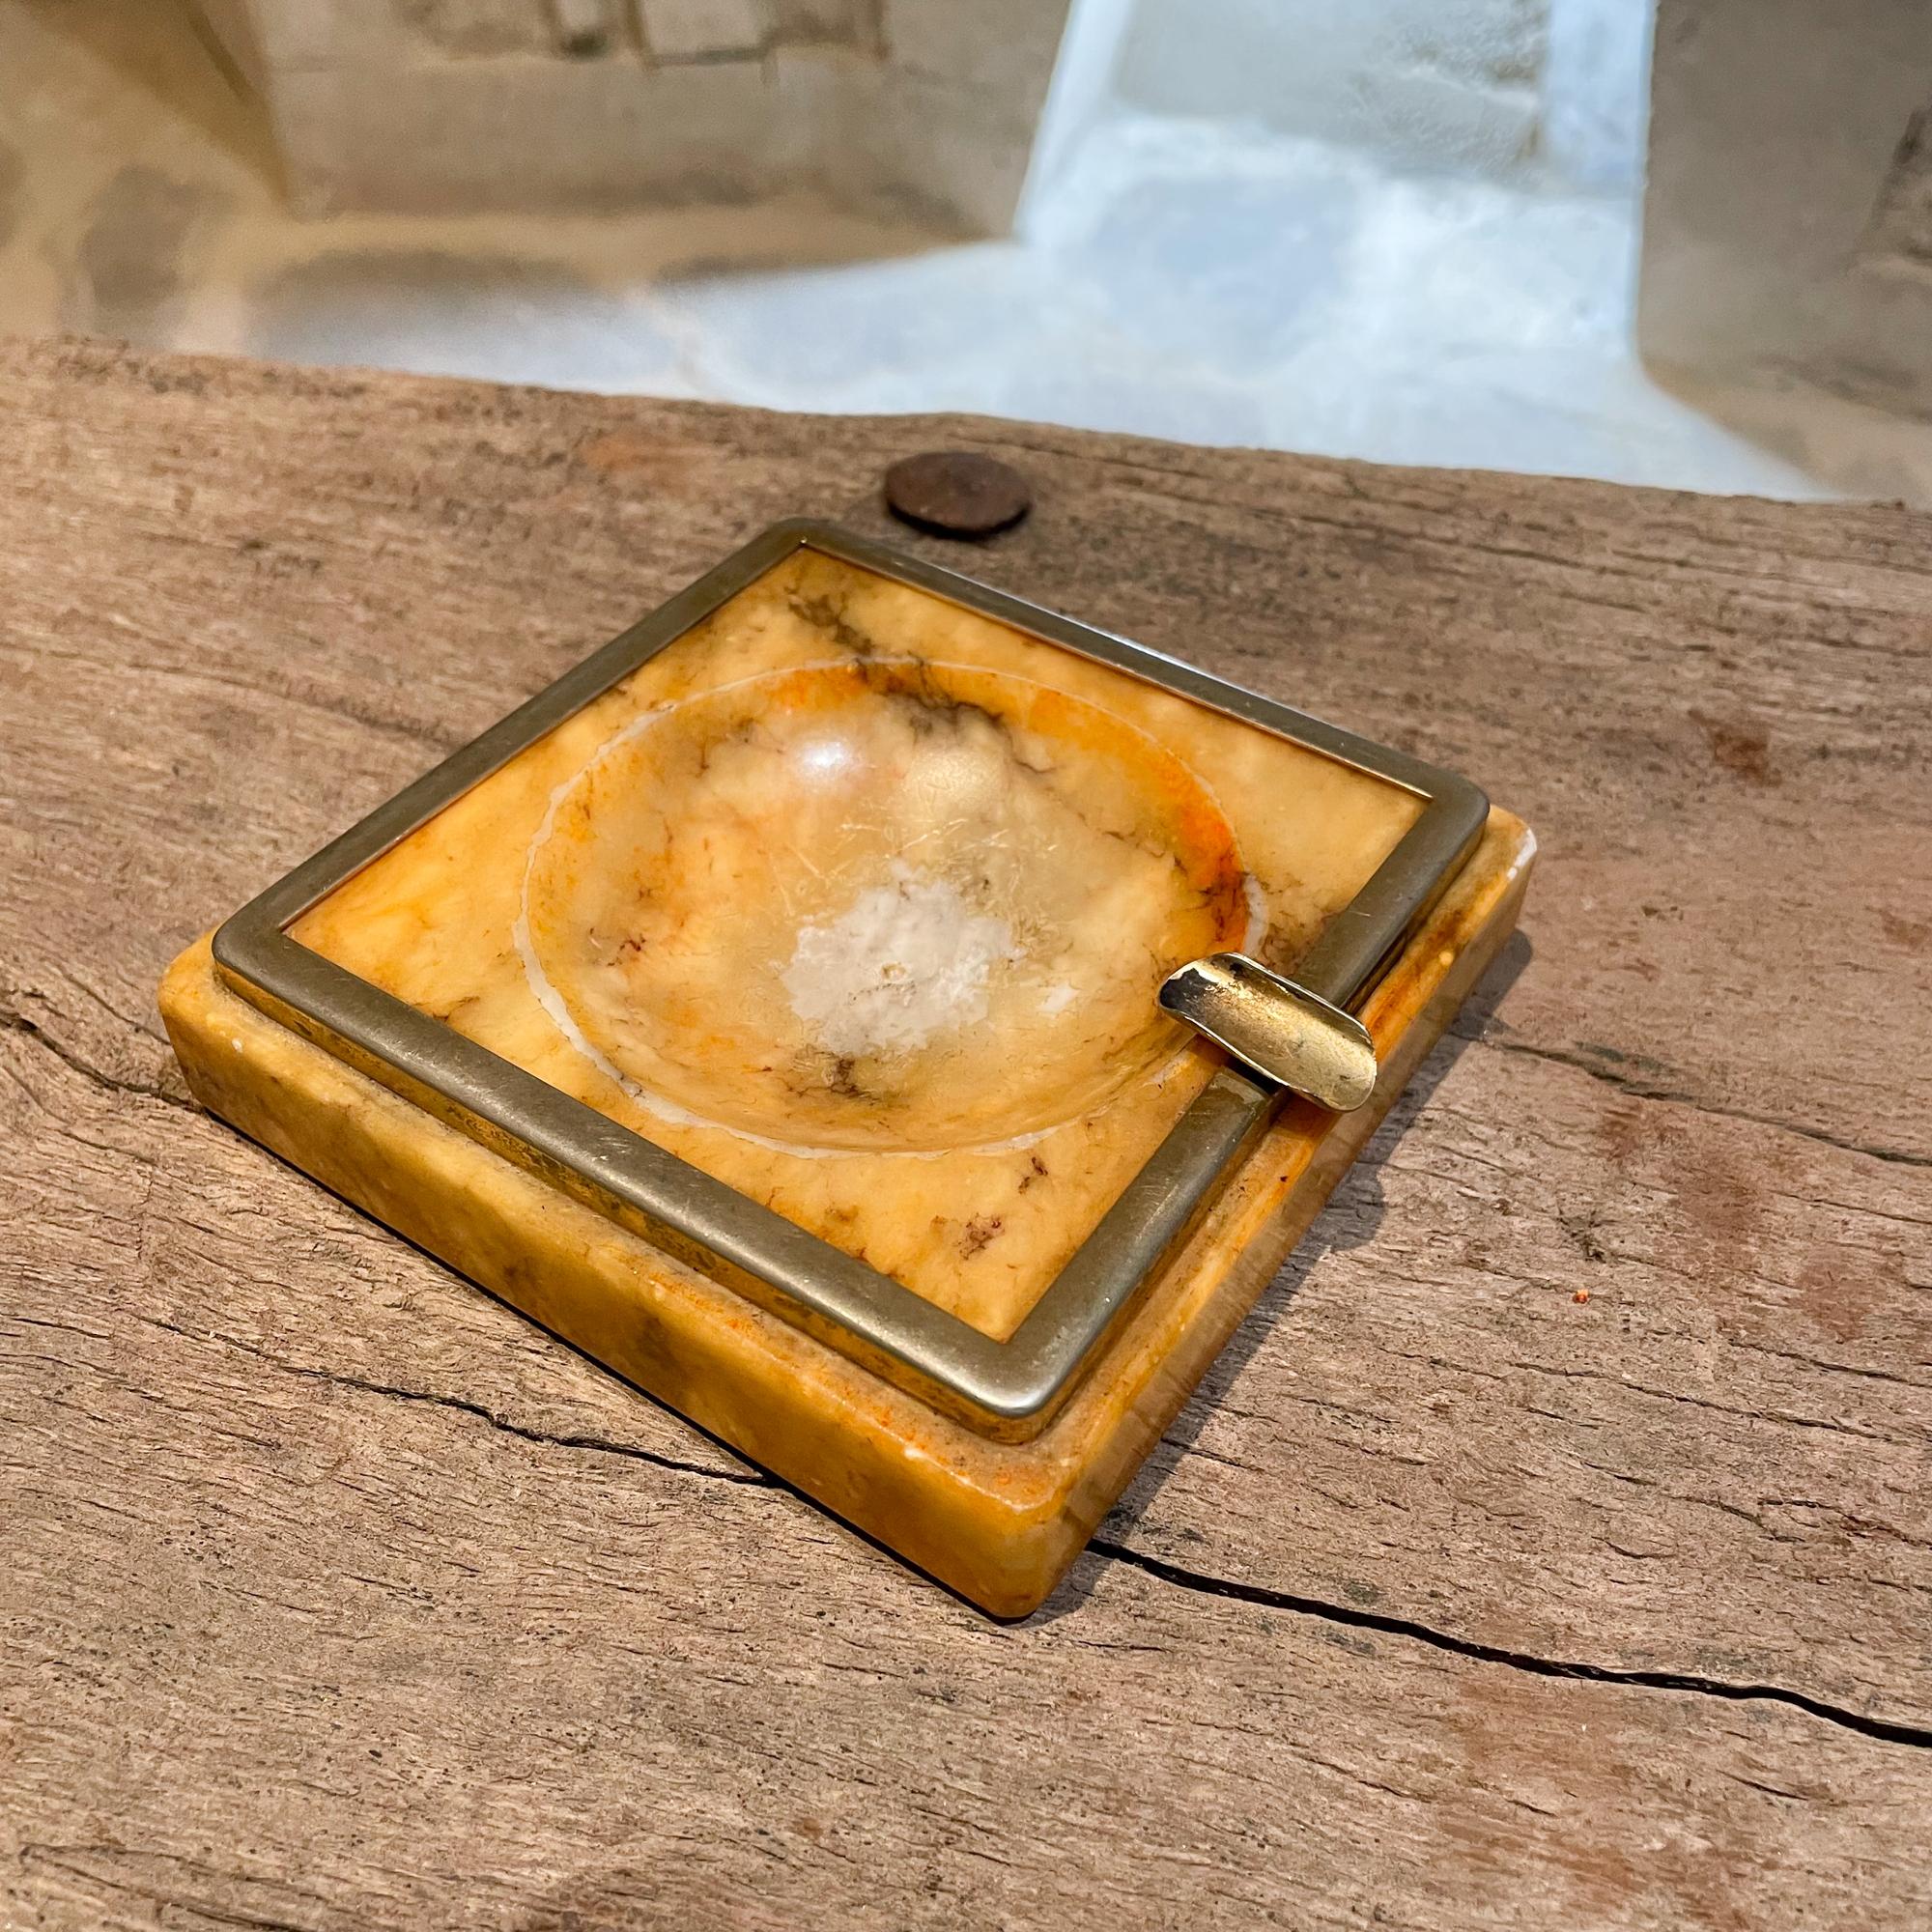 Mexico 1970s Mid-Century Modern Hipster ashtray
Vintage square stone ashtray outlined in brass.
Golden yellowish tones 
Measures: 4.5 x 4.5 x 1 H
Expect Vintage item presentation. Unrestored. Wear Visible. Middle section shows vintage wear.
See